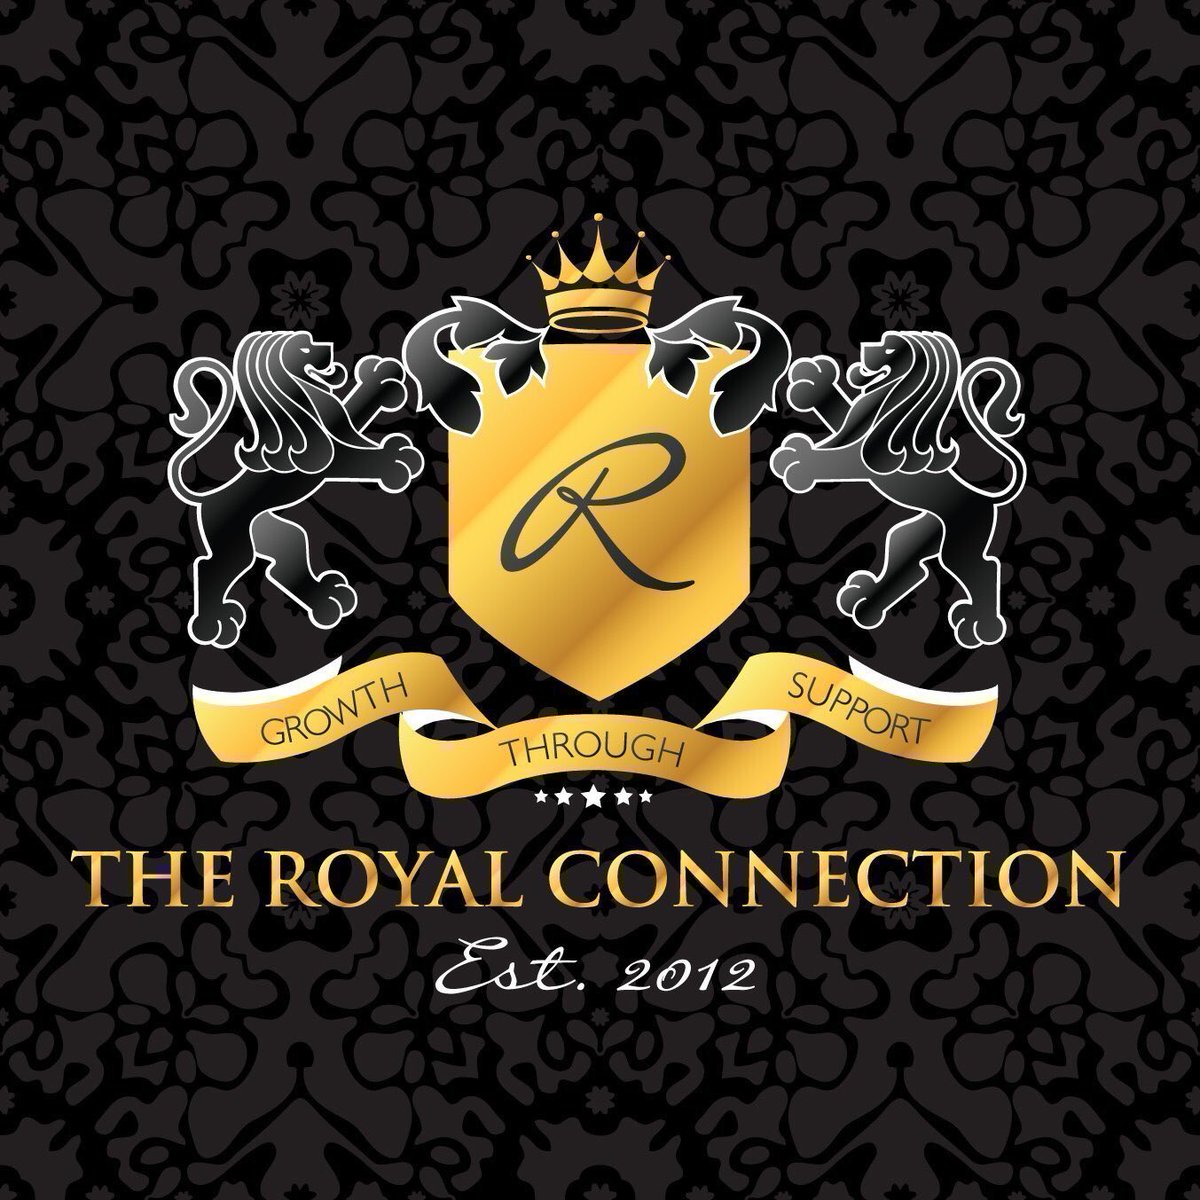 Be sure to support all the #smallbusiness that are @ADG_IQ #QueenOf, #KingOf and #MonarchOf winners in #Stockport #Manchester #Liverpool #Wigan #Warrington #Chester #Crewe and across the #NorthWest 😊 #SmallBizFridayUK #ShopIndie #BizBubble theroyalconnection.co.uk